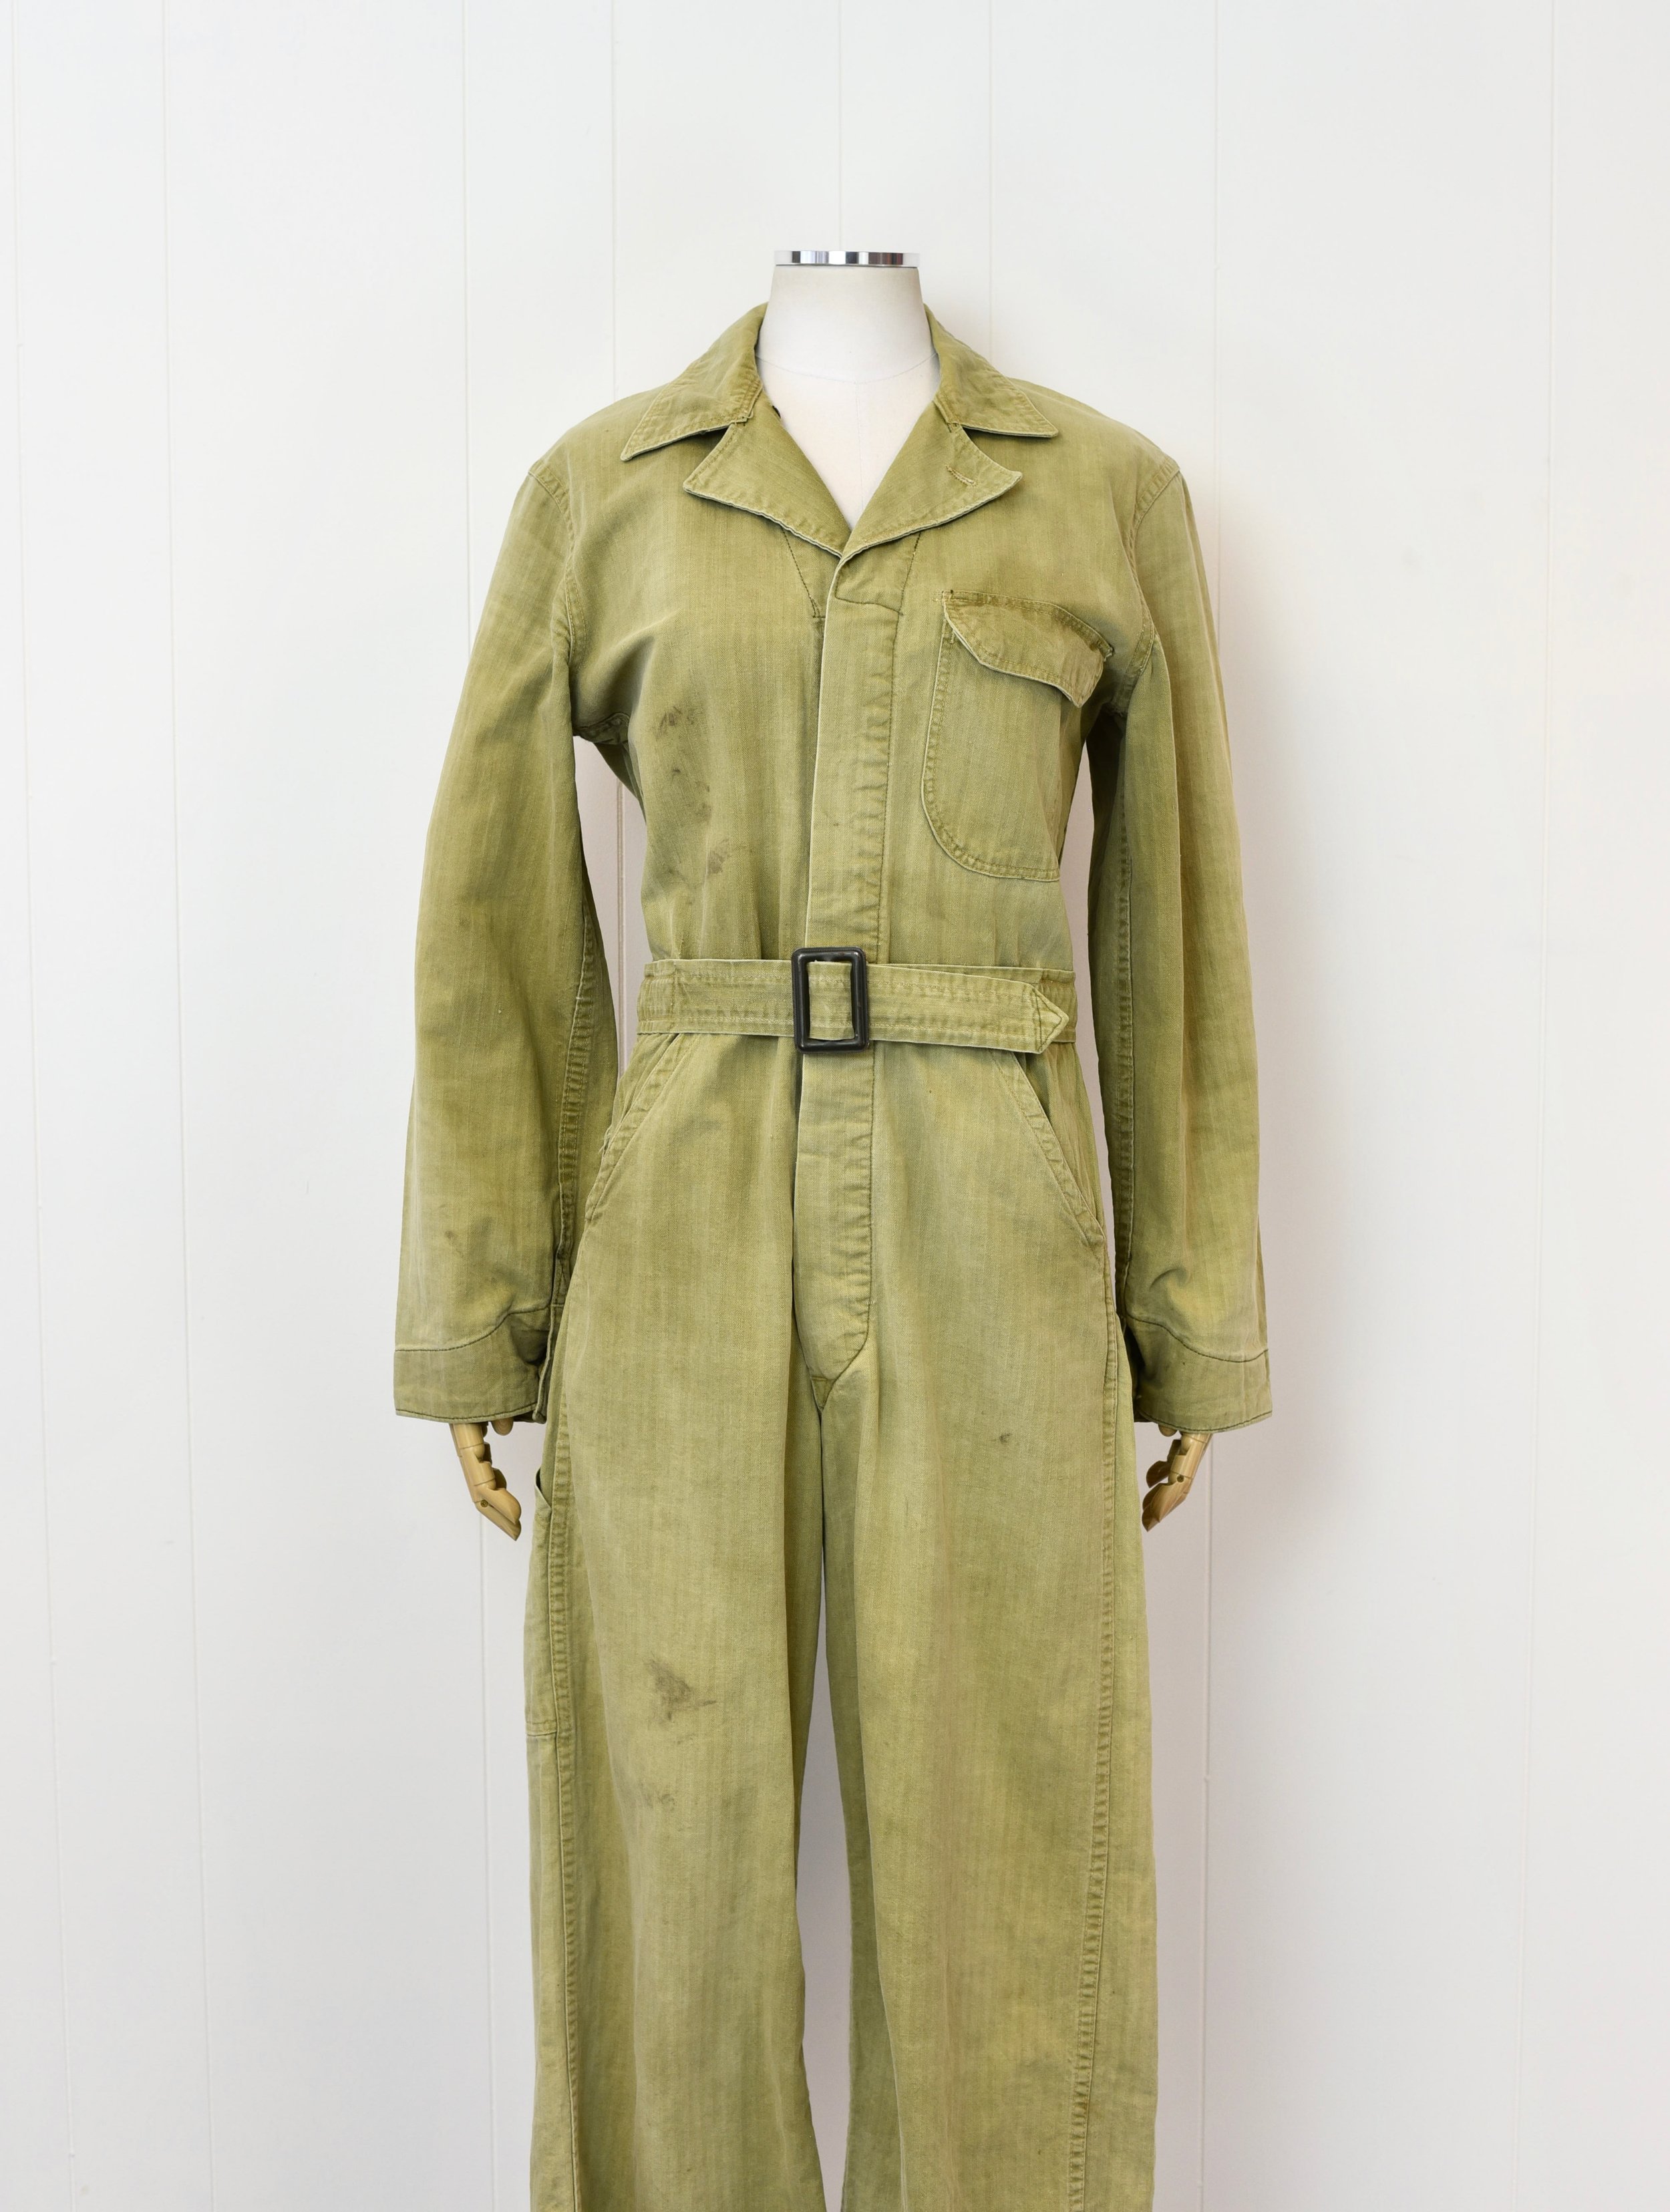 1950s Green Army Military Cotton Jumpsuit Coveralls — Canned Ham Vintage